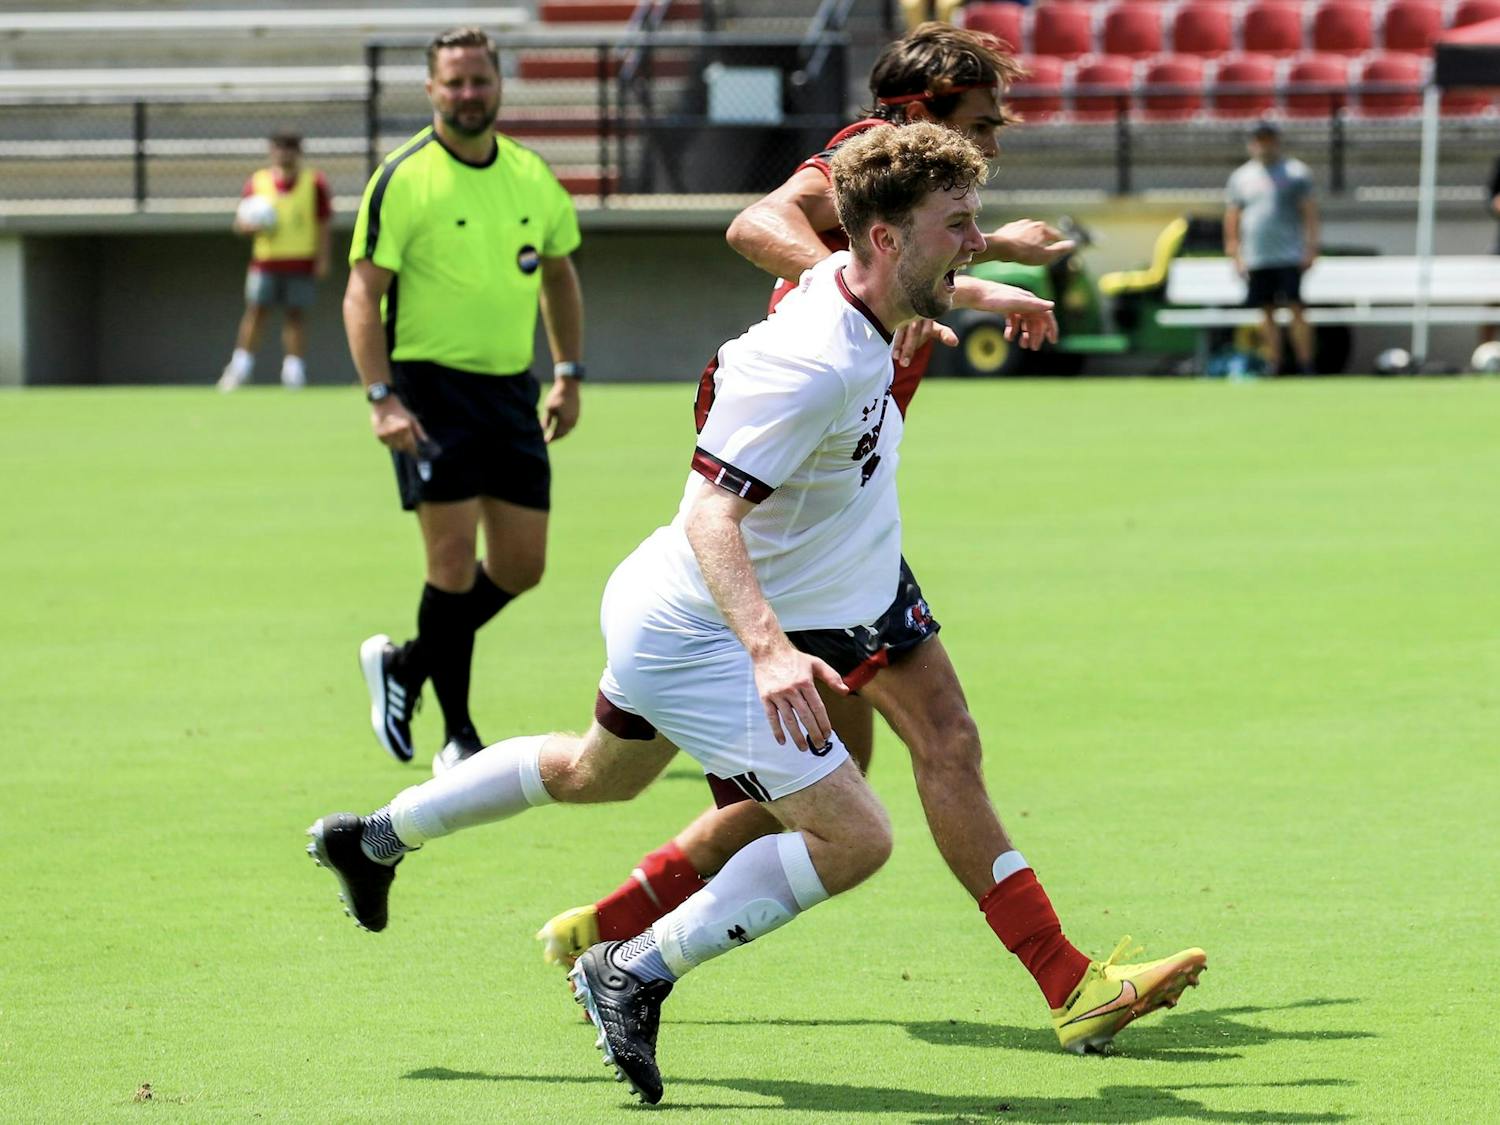 The South Carolina men's soccer team lost its first home game of the season to Gardner-Webb by a 2-0 score and is now 0-1-1 on the season. The Gamecocks totaled three shots on goal to the Bulldogs' six and surrendered one goal in each half. South Carolina will hit the pitch again on Sept. 1 against the Clemson Tigers.